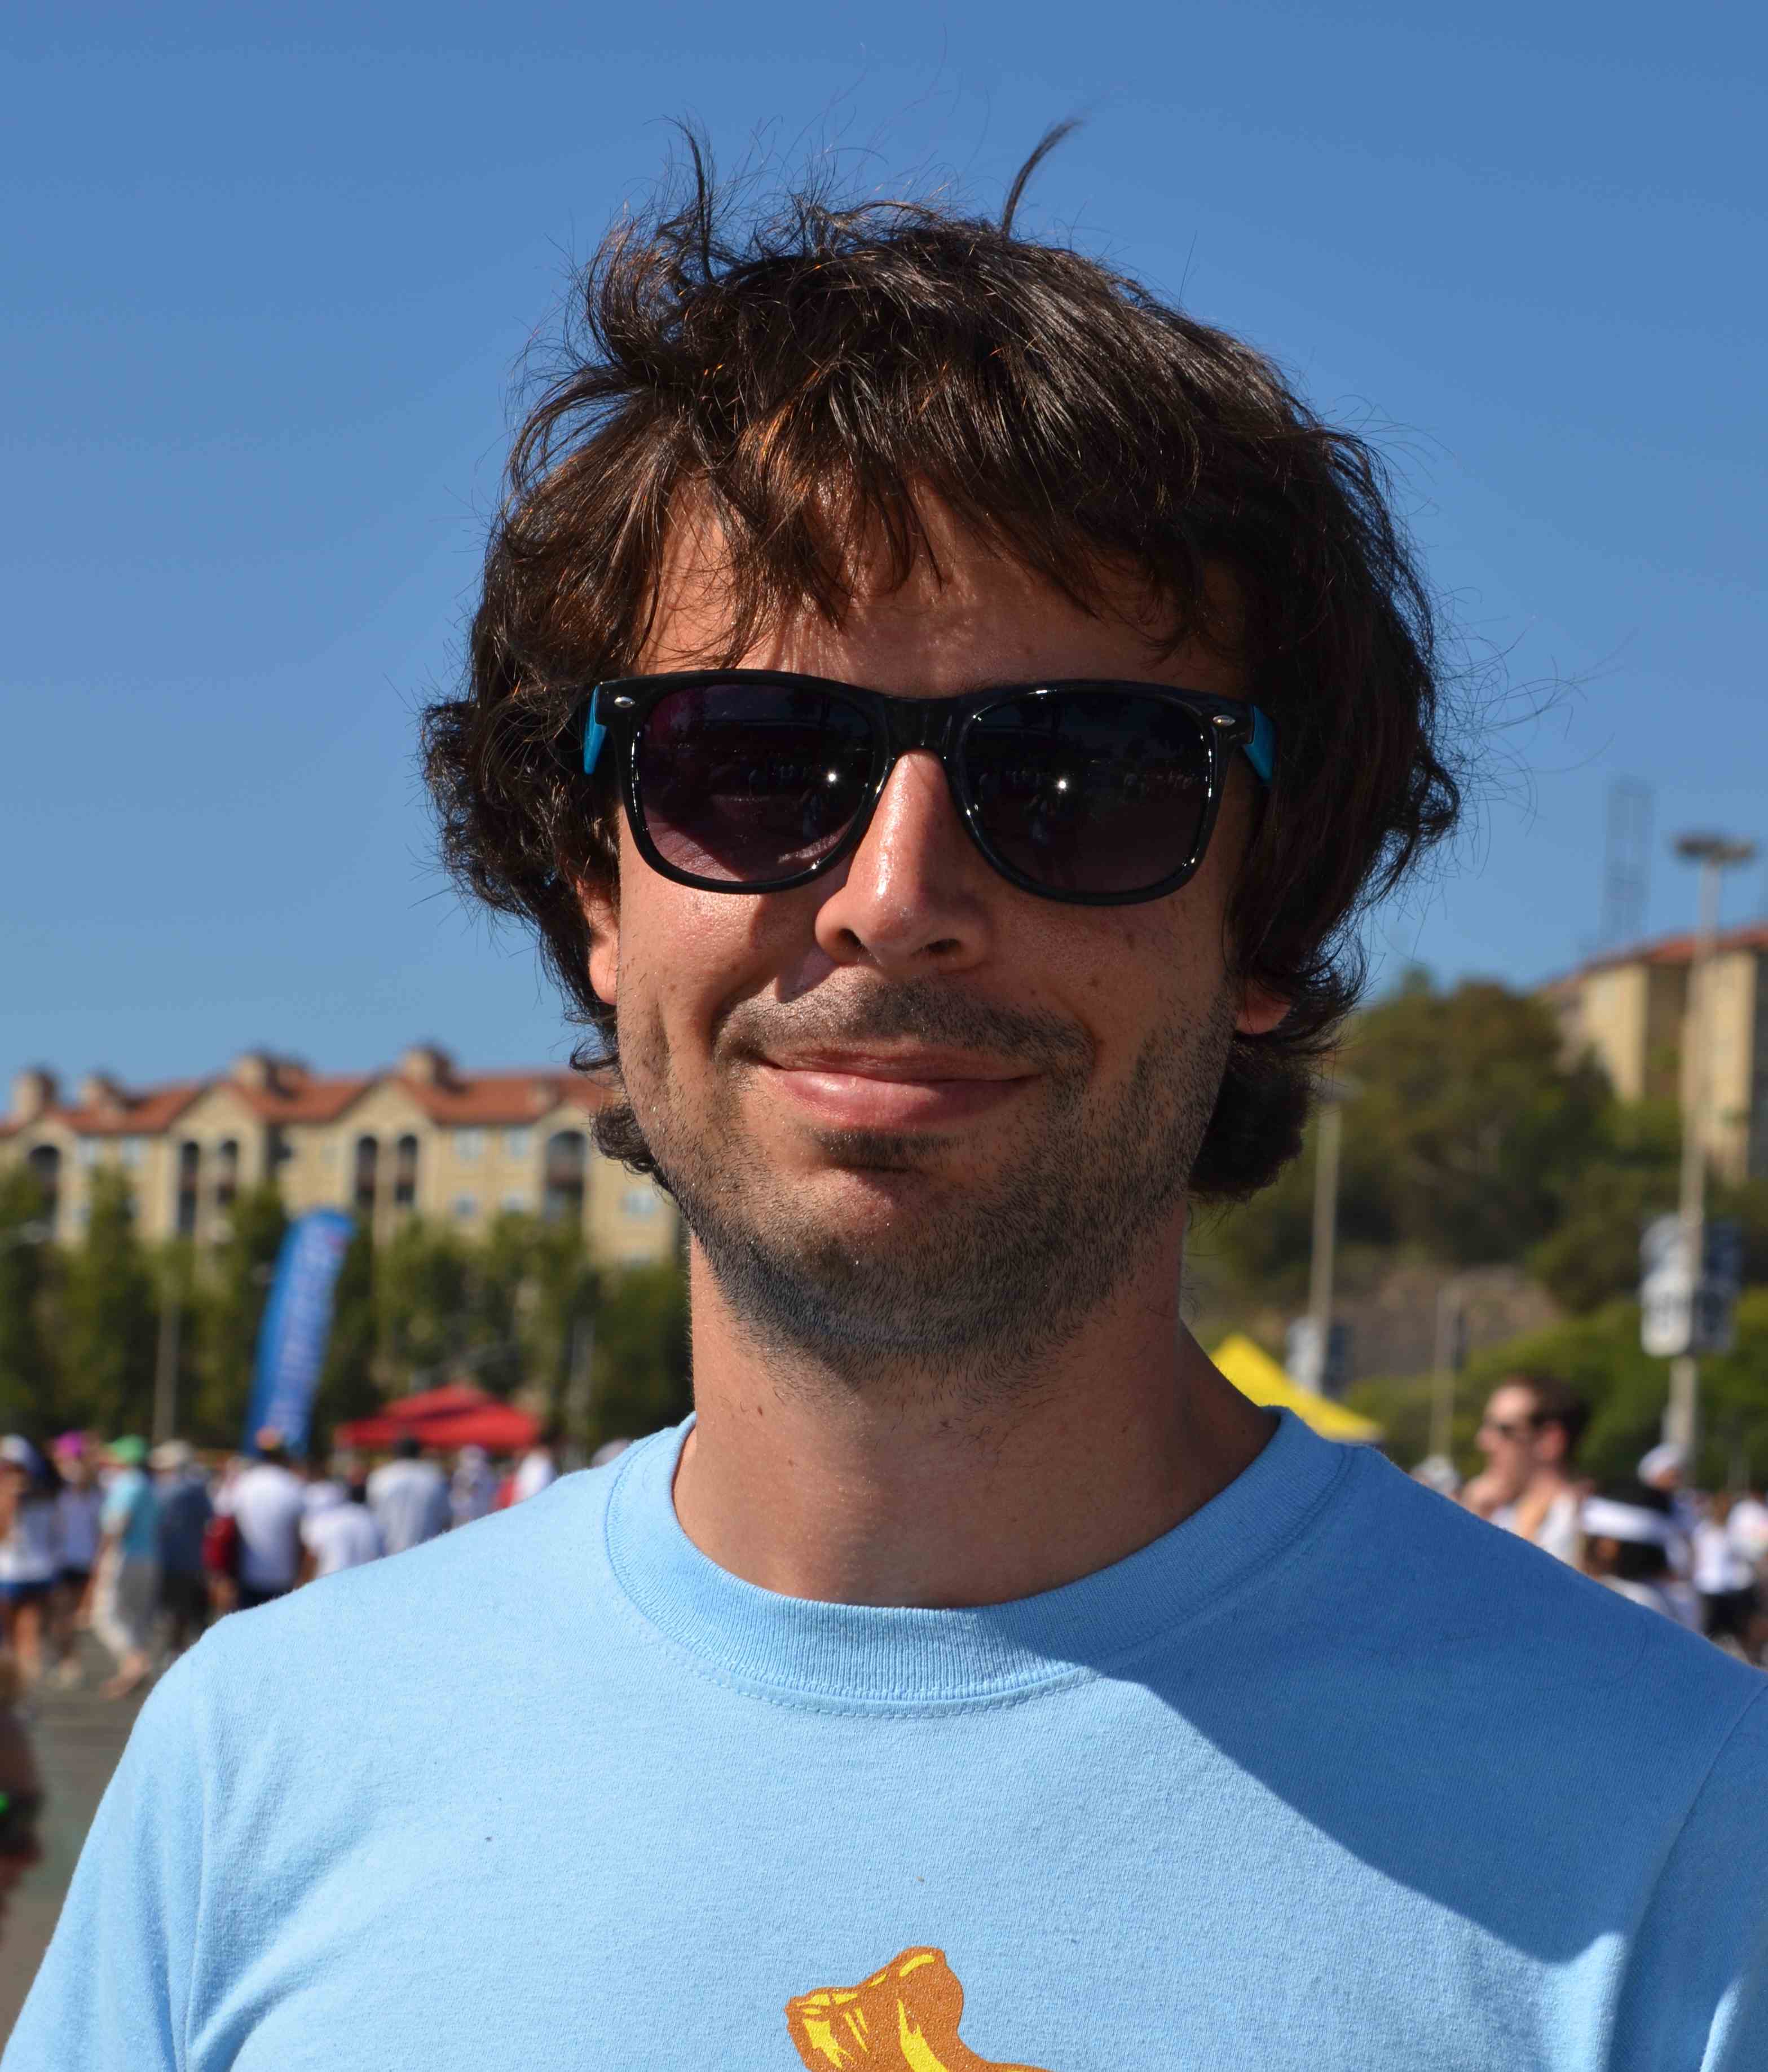 Alessandro Pitanti from CnrNano wins the Accademia dei Lincei young physicist award